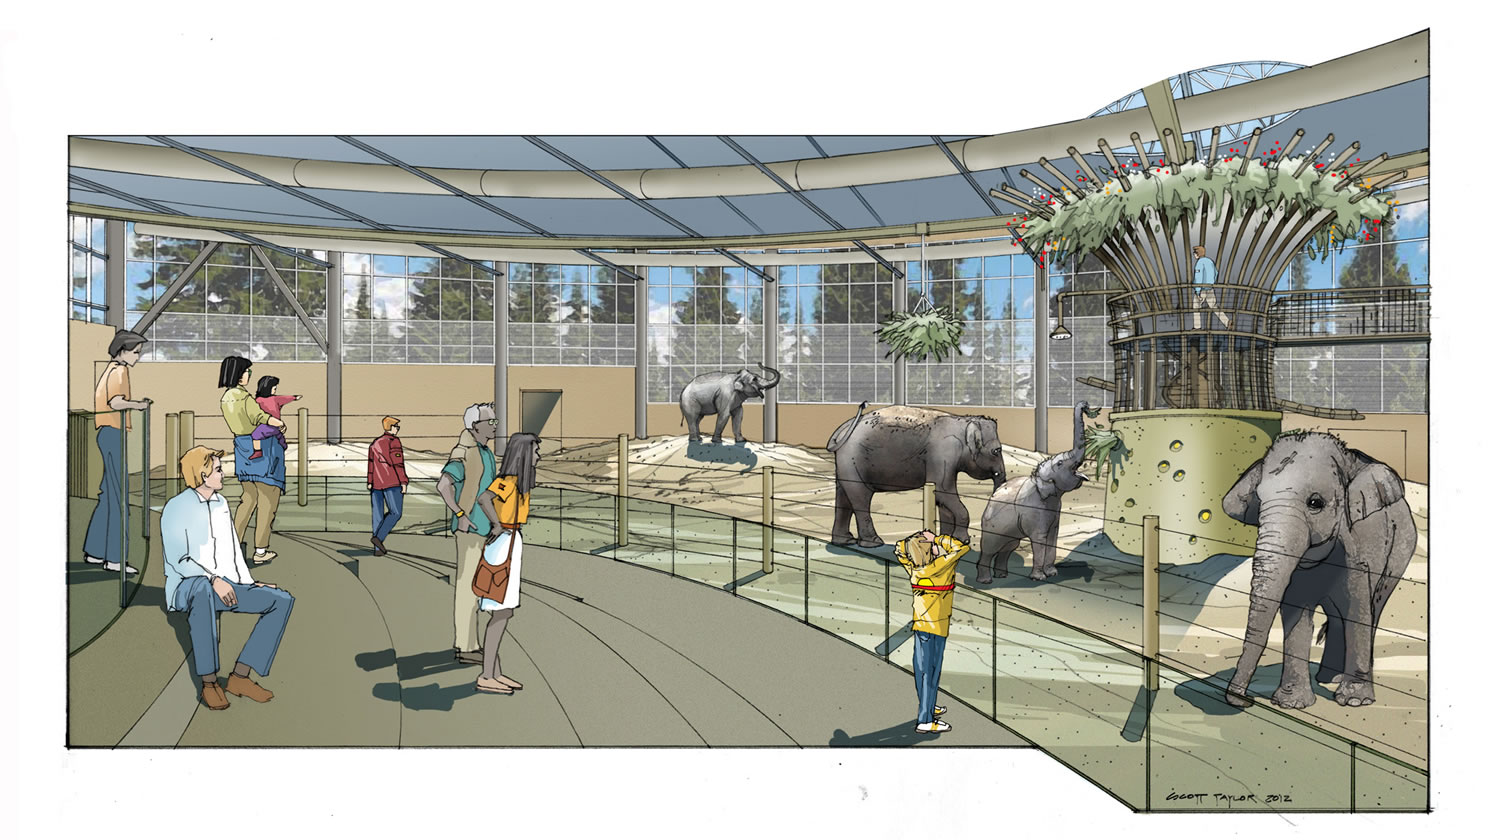 Forest Hall is the indoor portion of Elephant Lands and is scheduled to open in 2015.